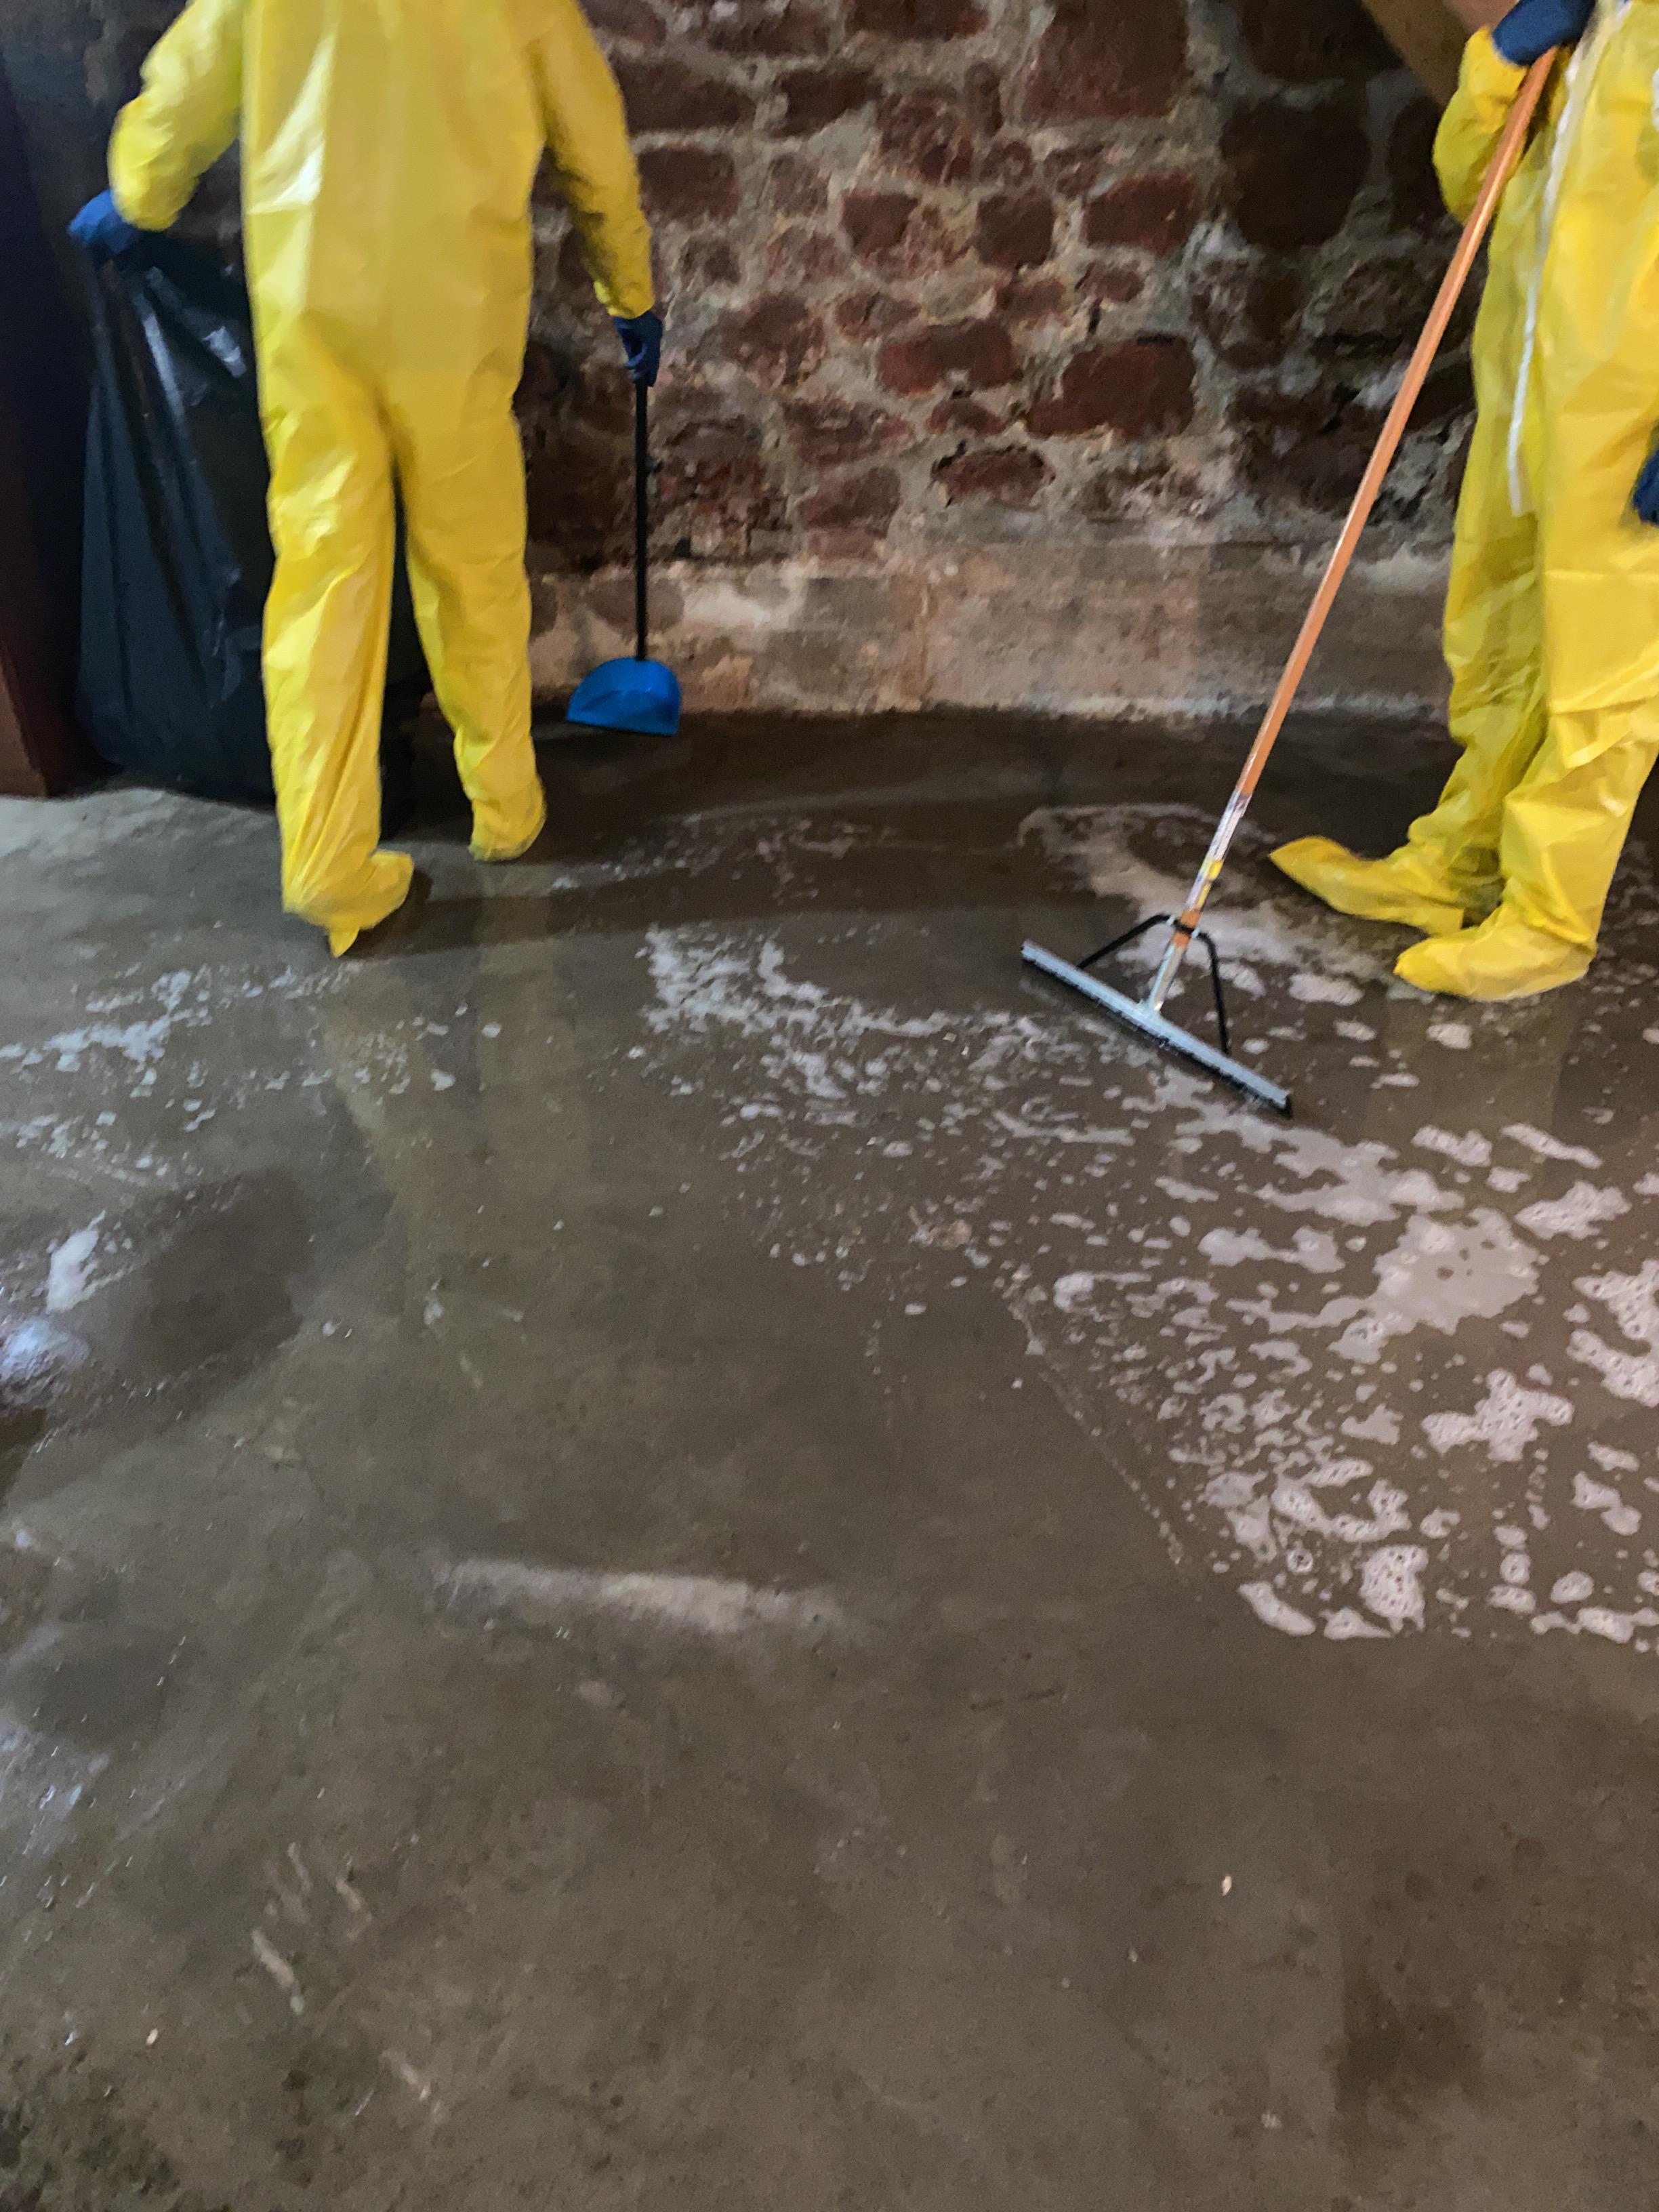 Sewage clean-up from water loss on basement floor